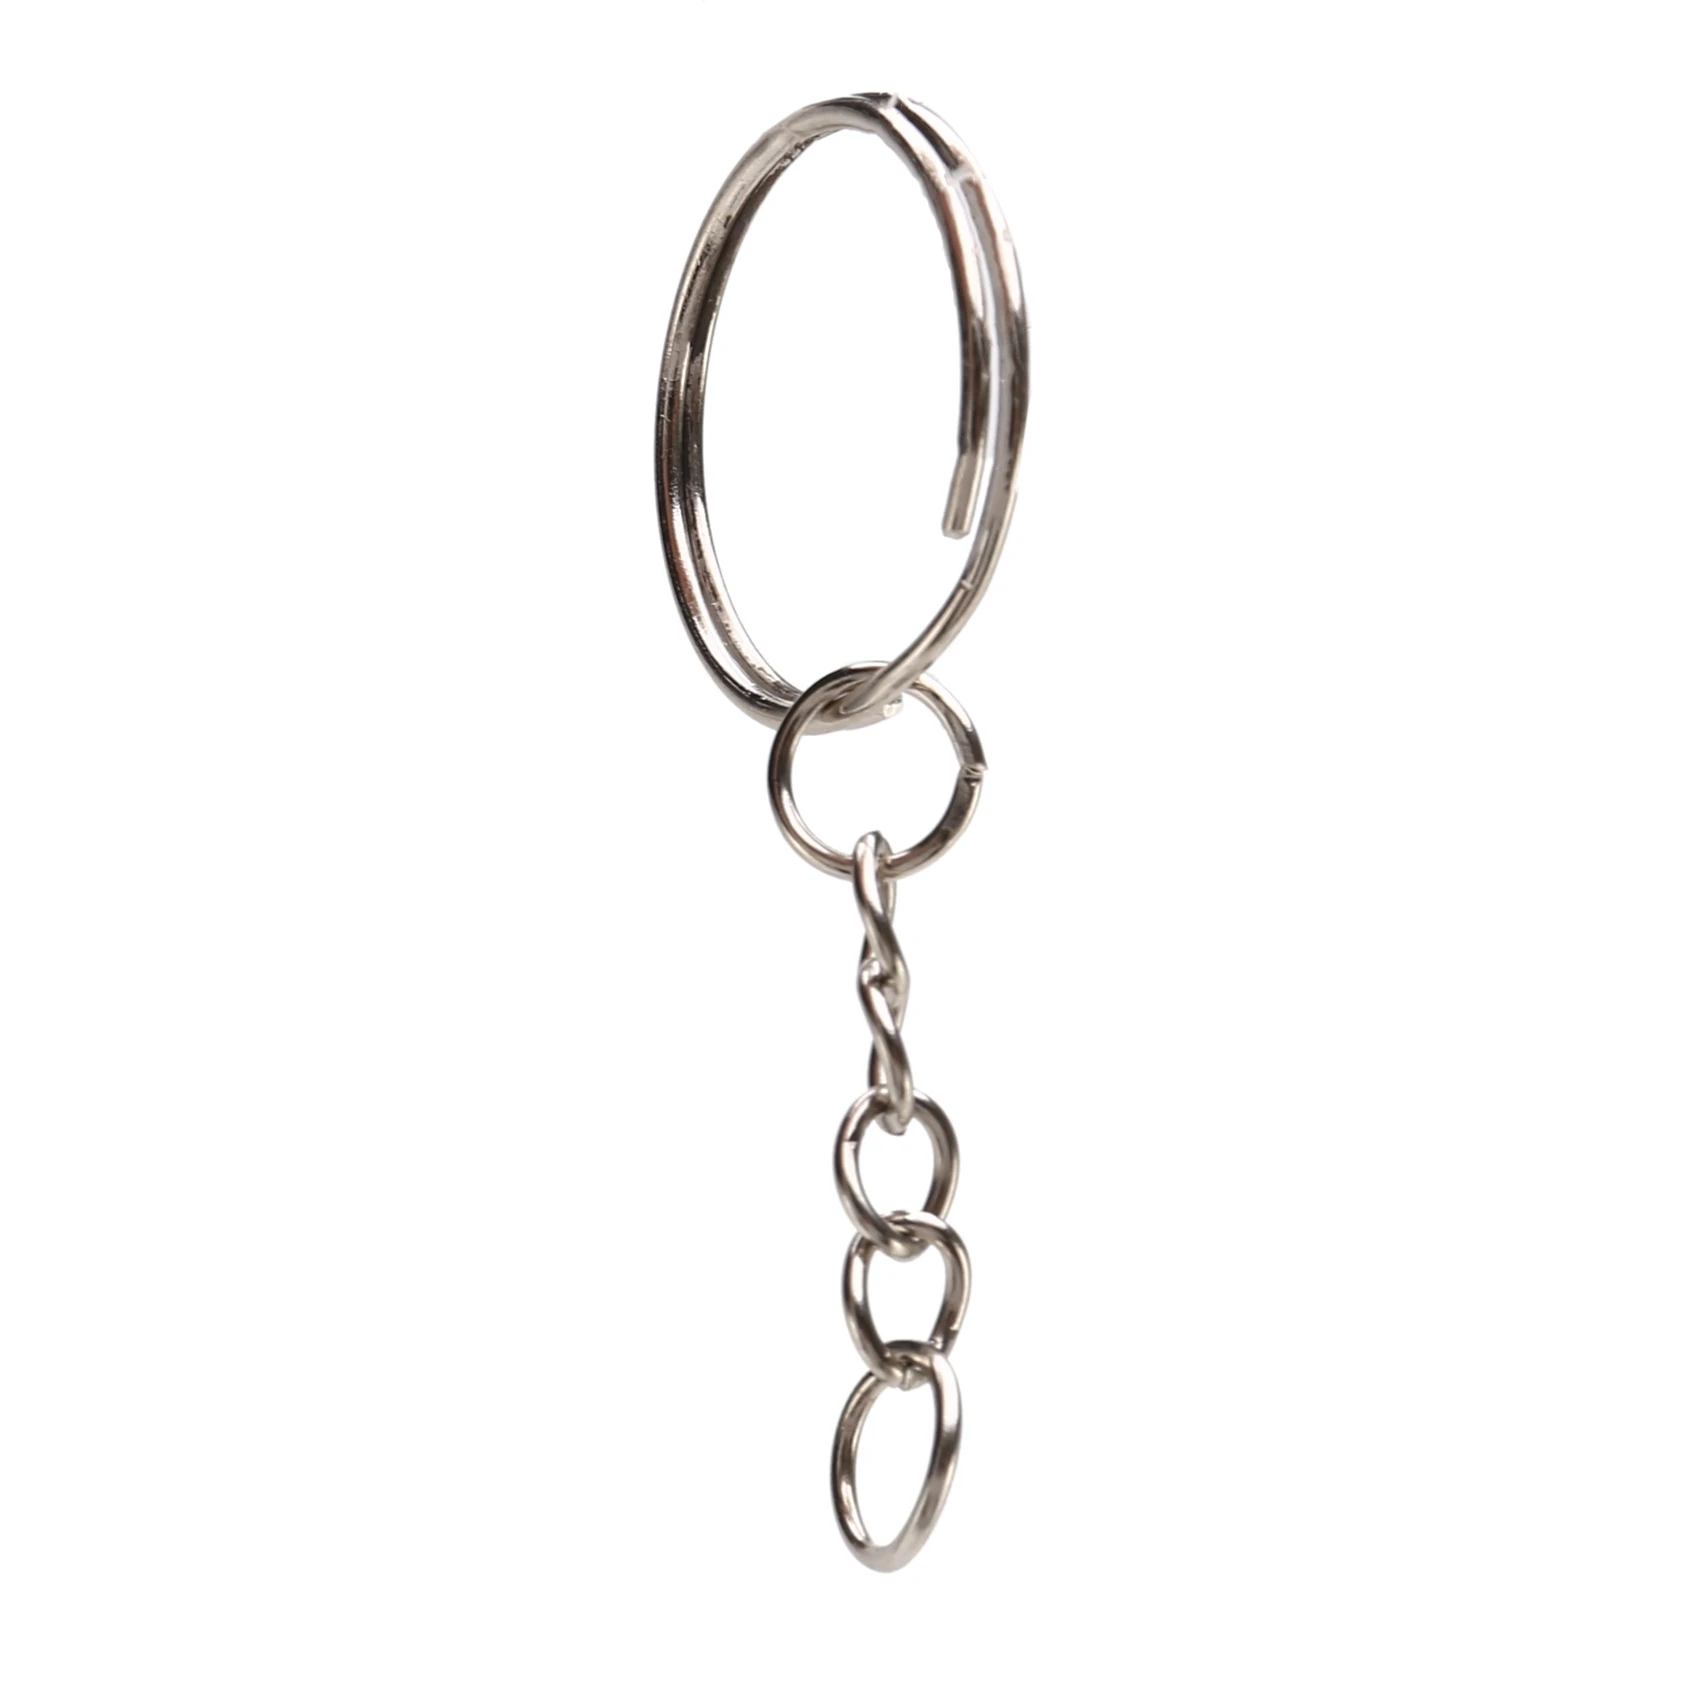 Stainless Steel Key Rings - 5 Pcs ~1inch, 25mm Round Split Key Rings for  Keychains - Surgical Grade Stainless Steel Keychain Rings